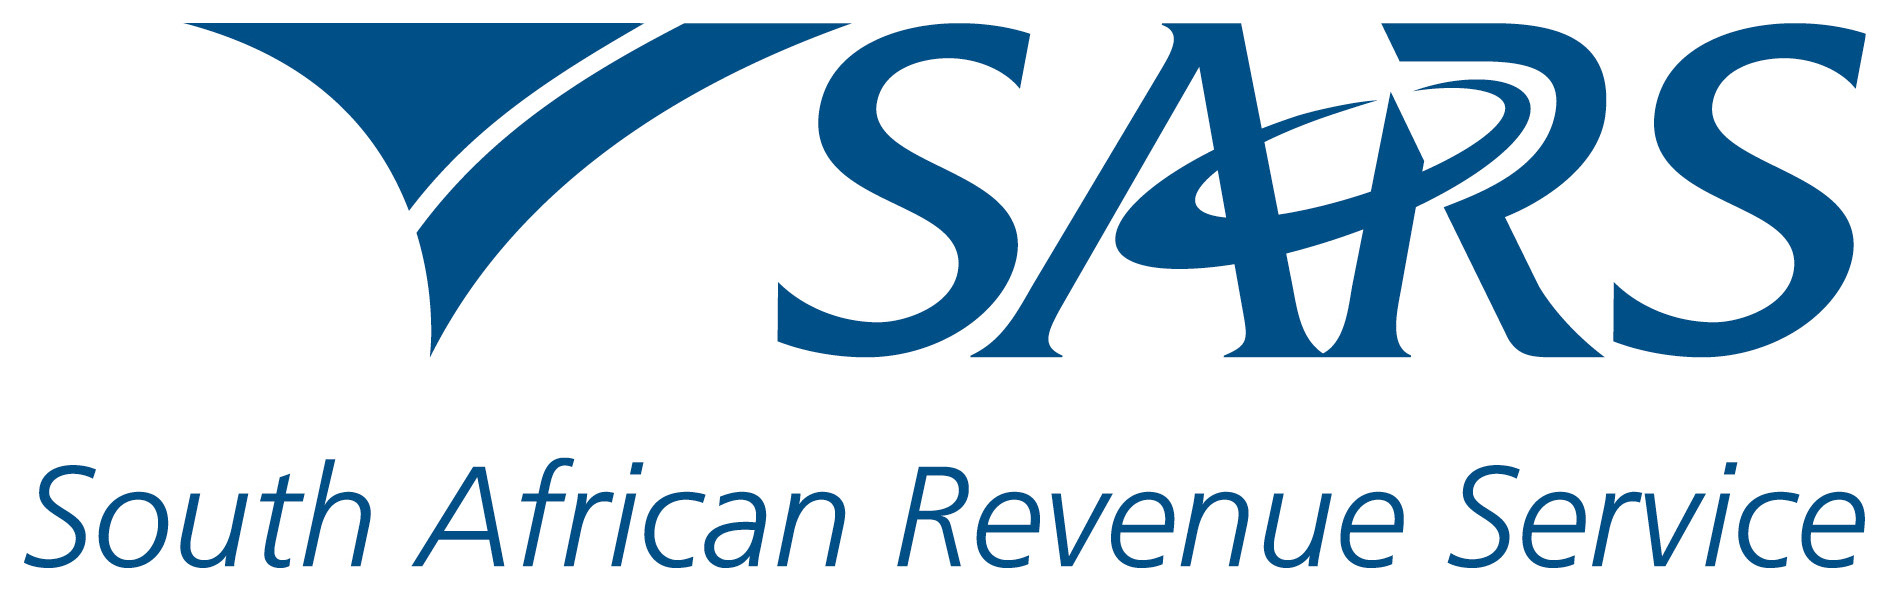 SARS-Logo - Excelsiar Payroll Outsourcing